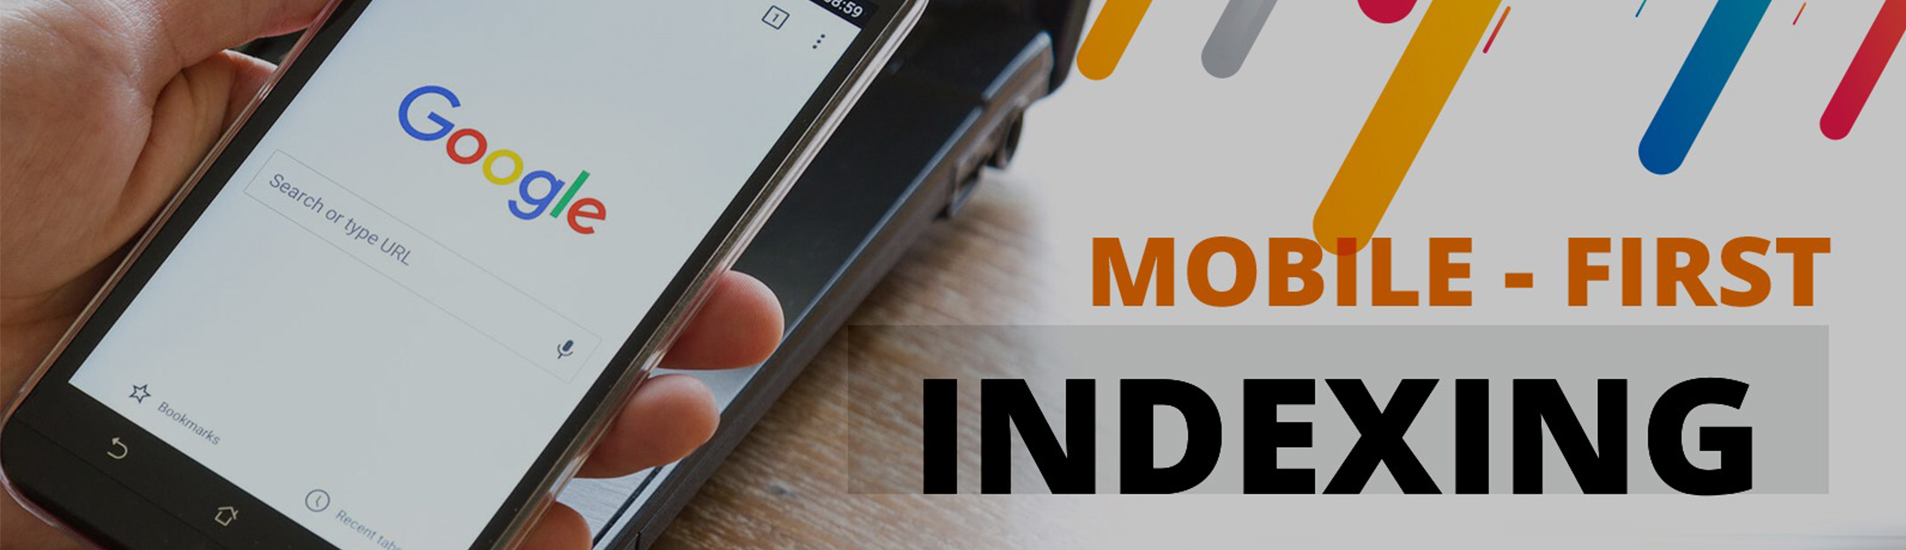 Incorporating Mobile-First Indexing: Necessity, Guidelines & Recommendations